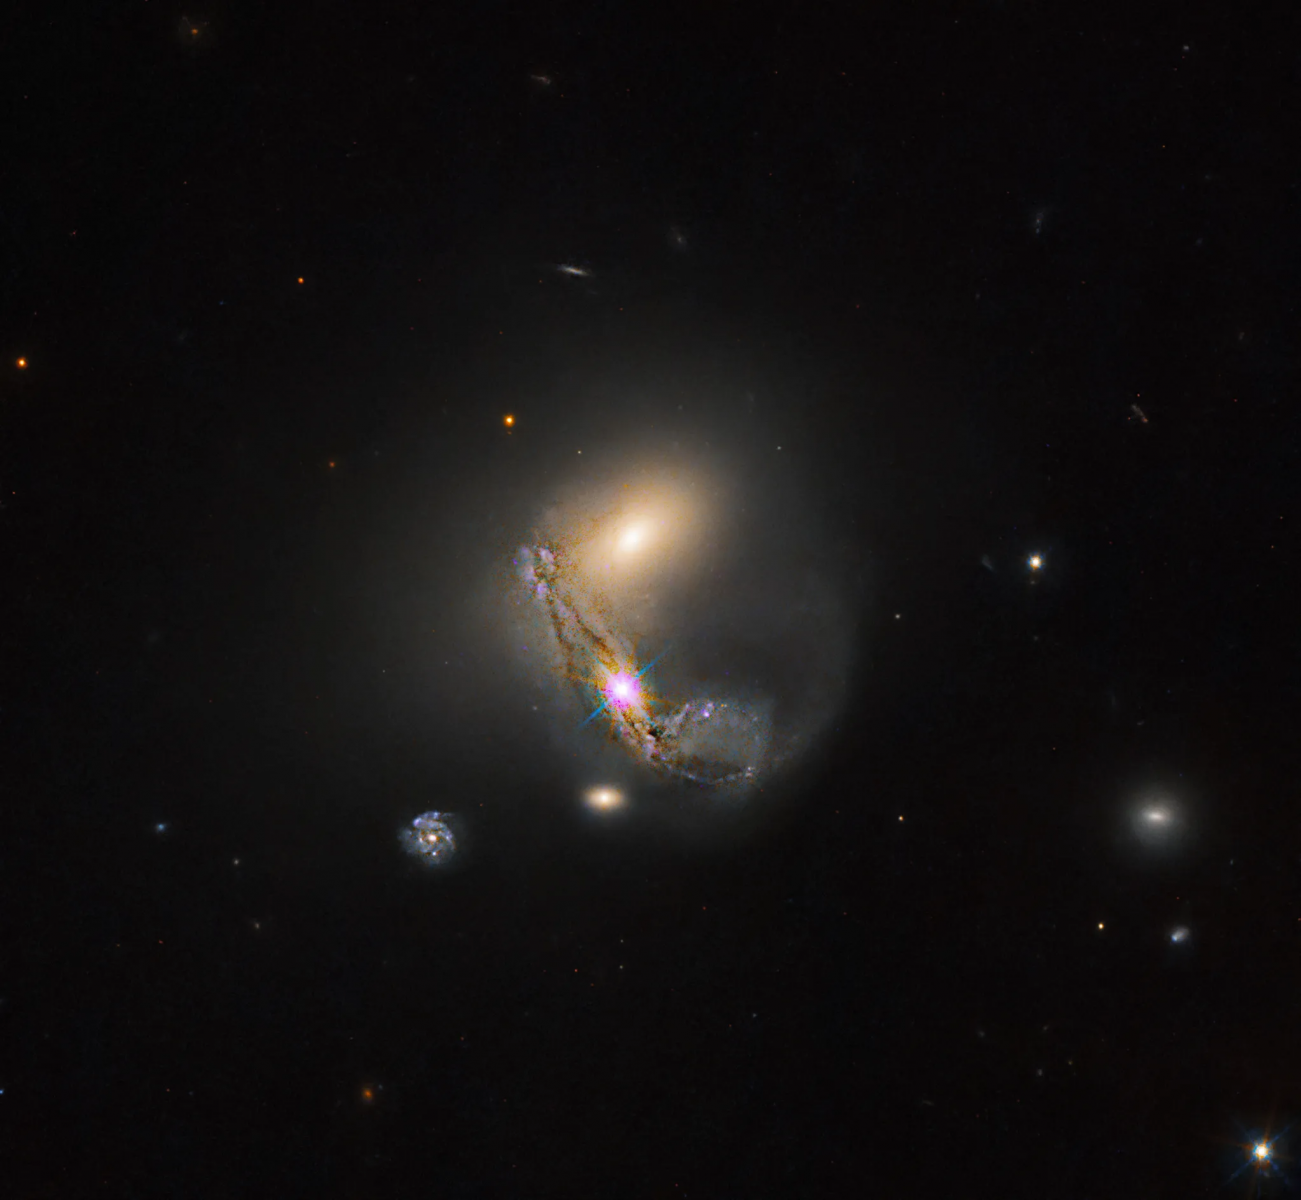 NASA Hubble Space Telescope Captures Dazzling Image of Bright Interacting Galaxies